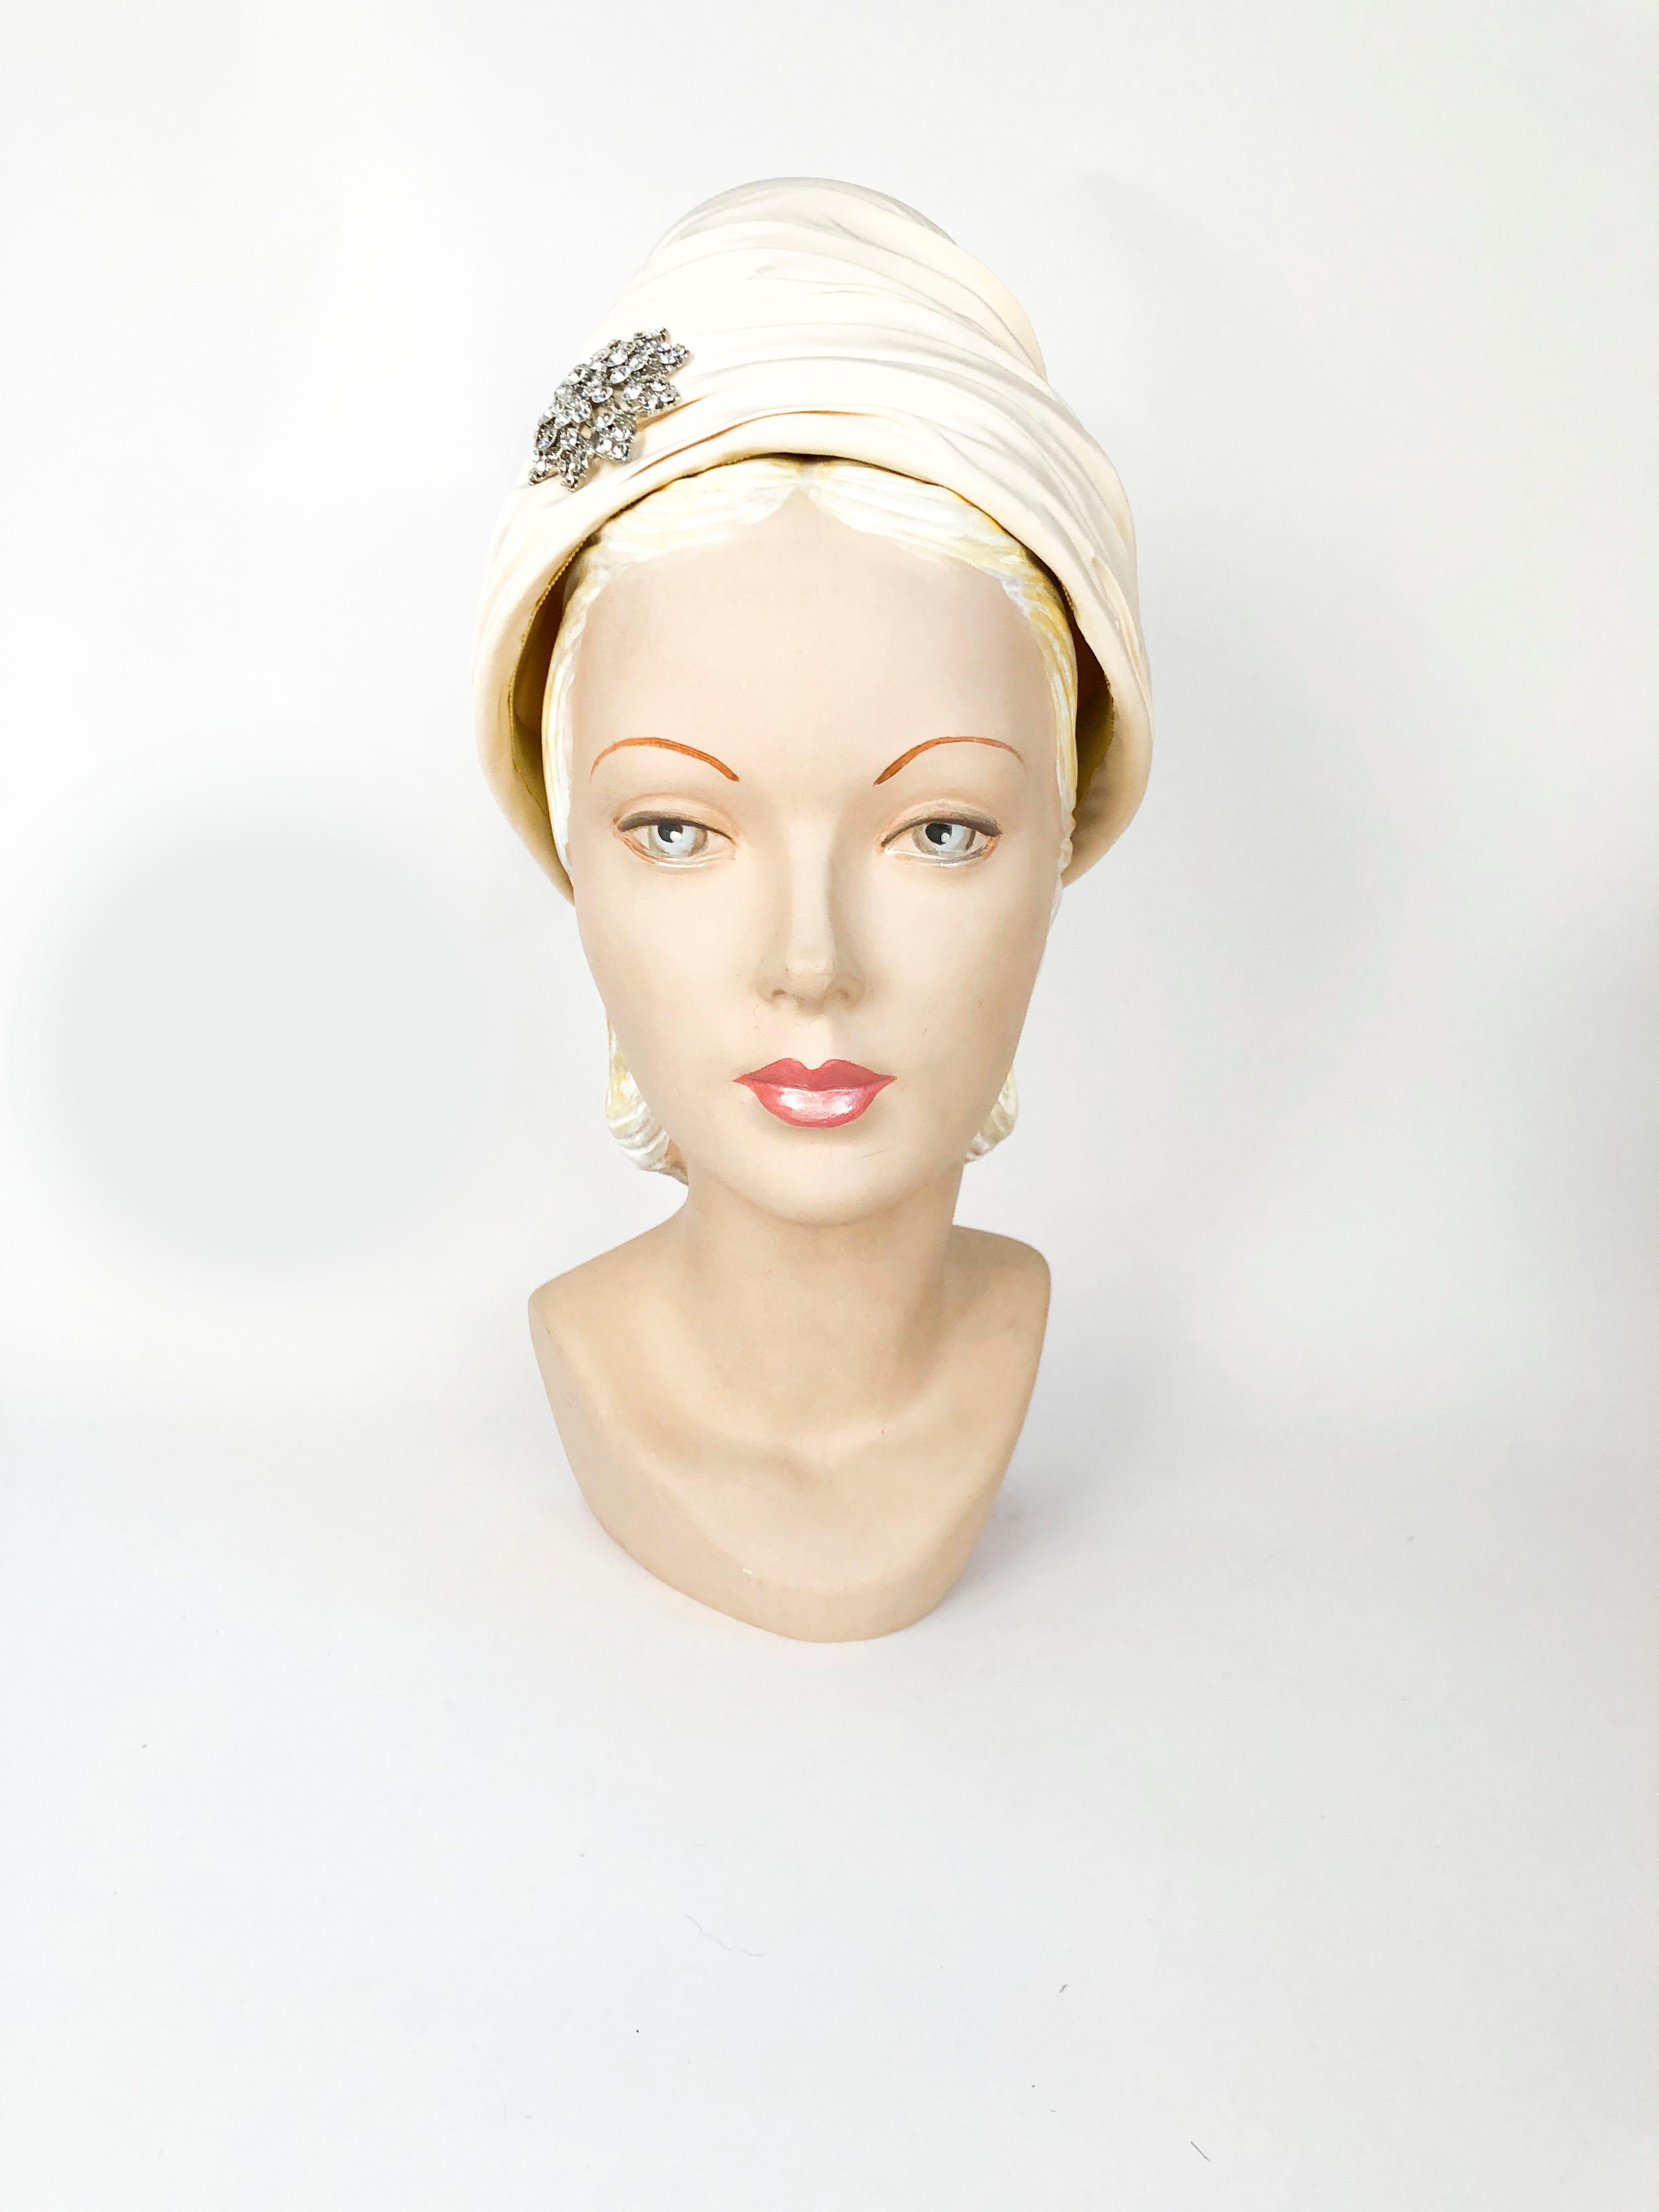 1950s/1960s High-Fashion Structured Turban with a high-crown in cream bone color that is gathered and layered around the entire hat. Adorned with a clear rhinestone accent